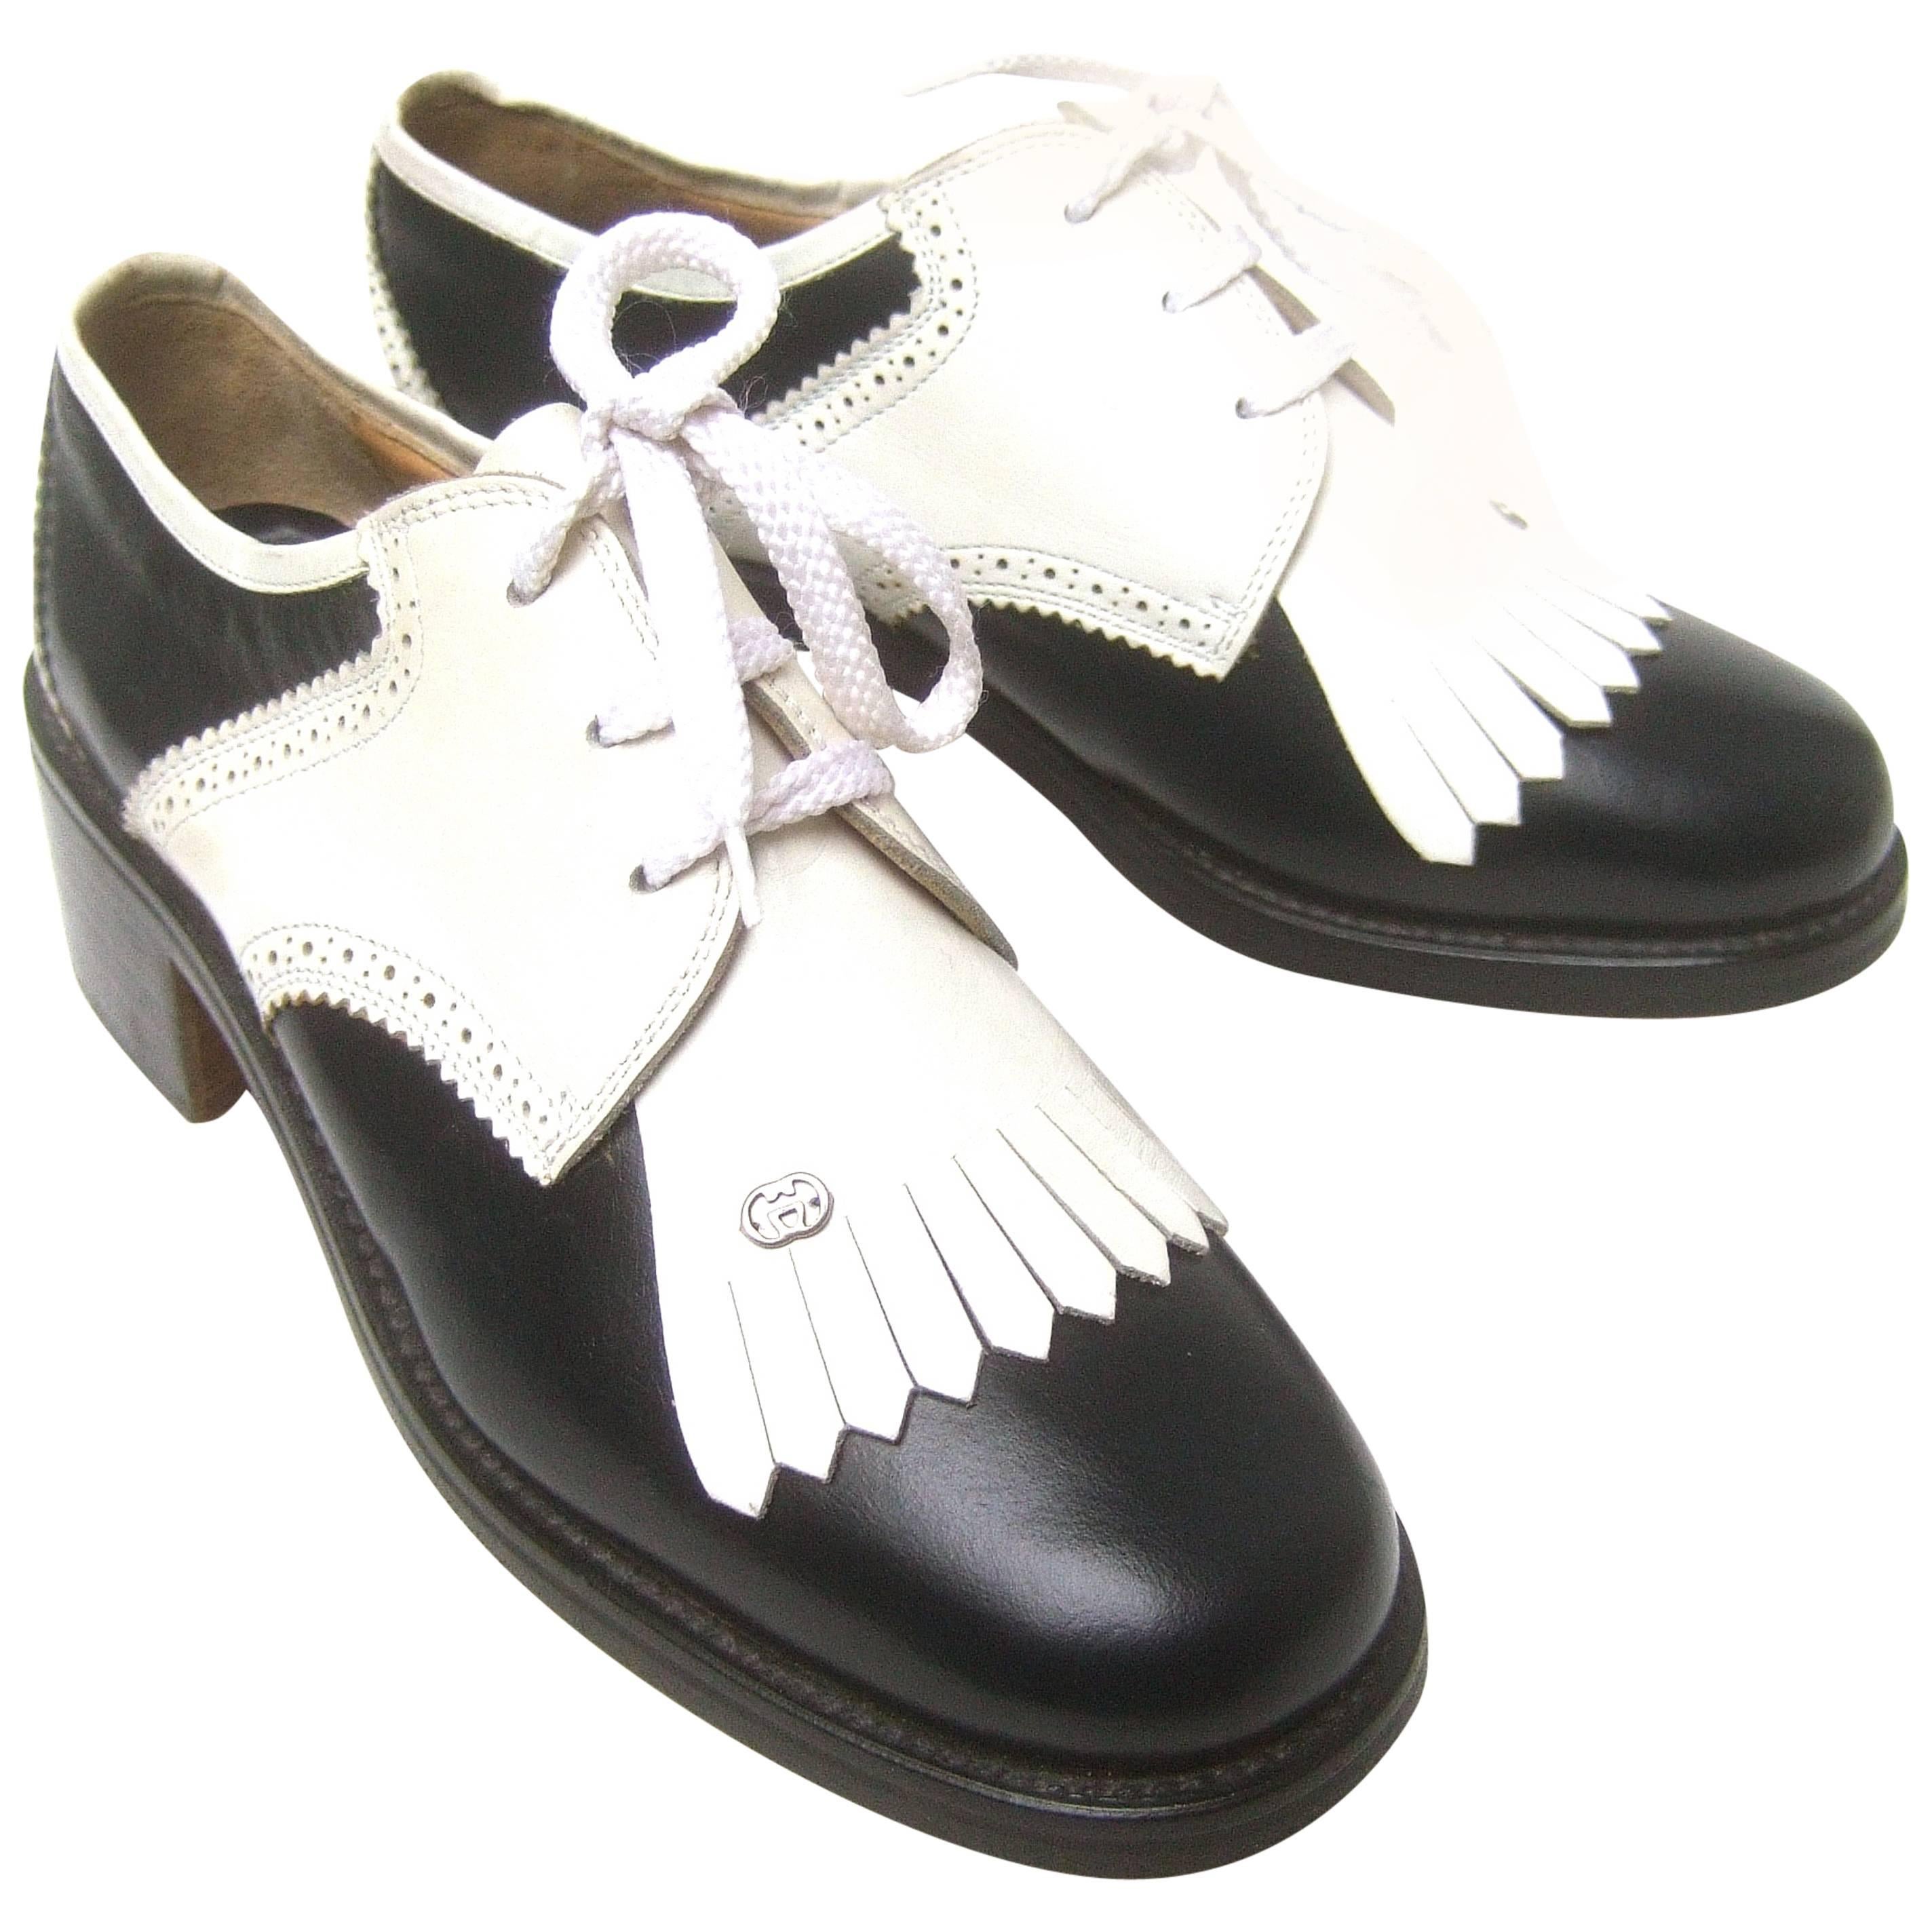 Gucci Womens Rare Leather Brogue Golf Shoes c 1980s